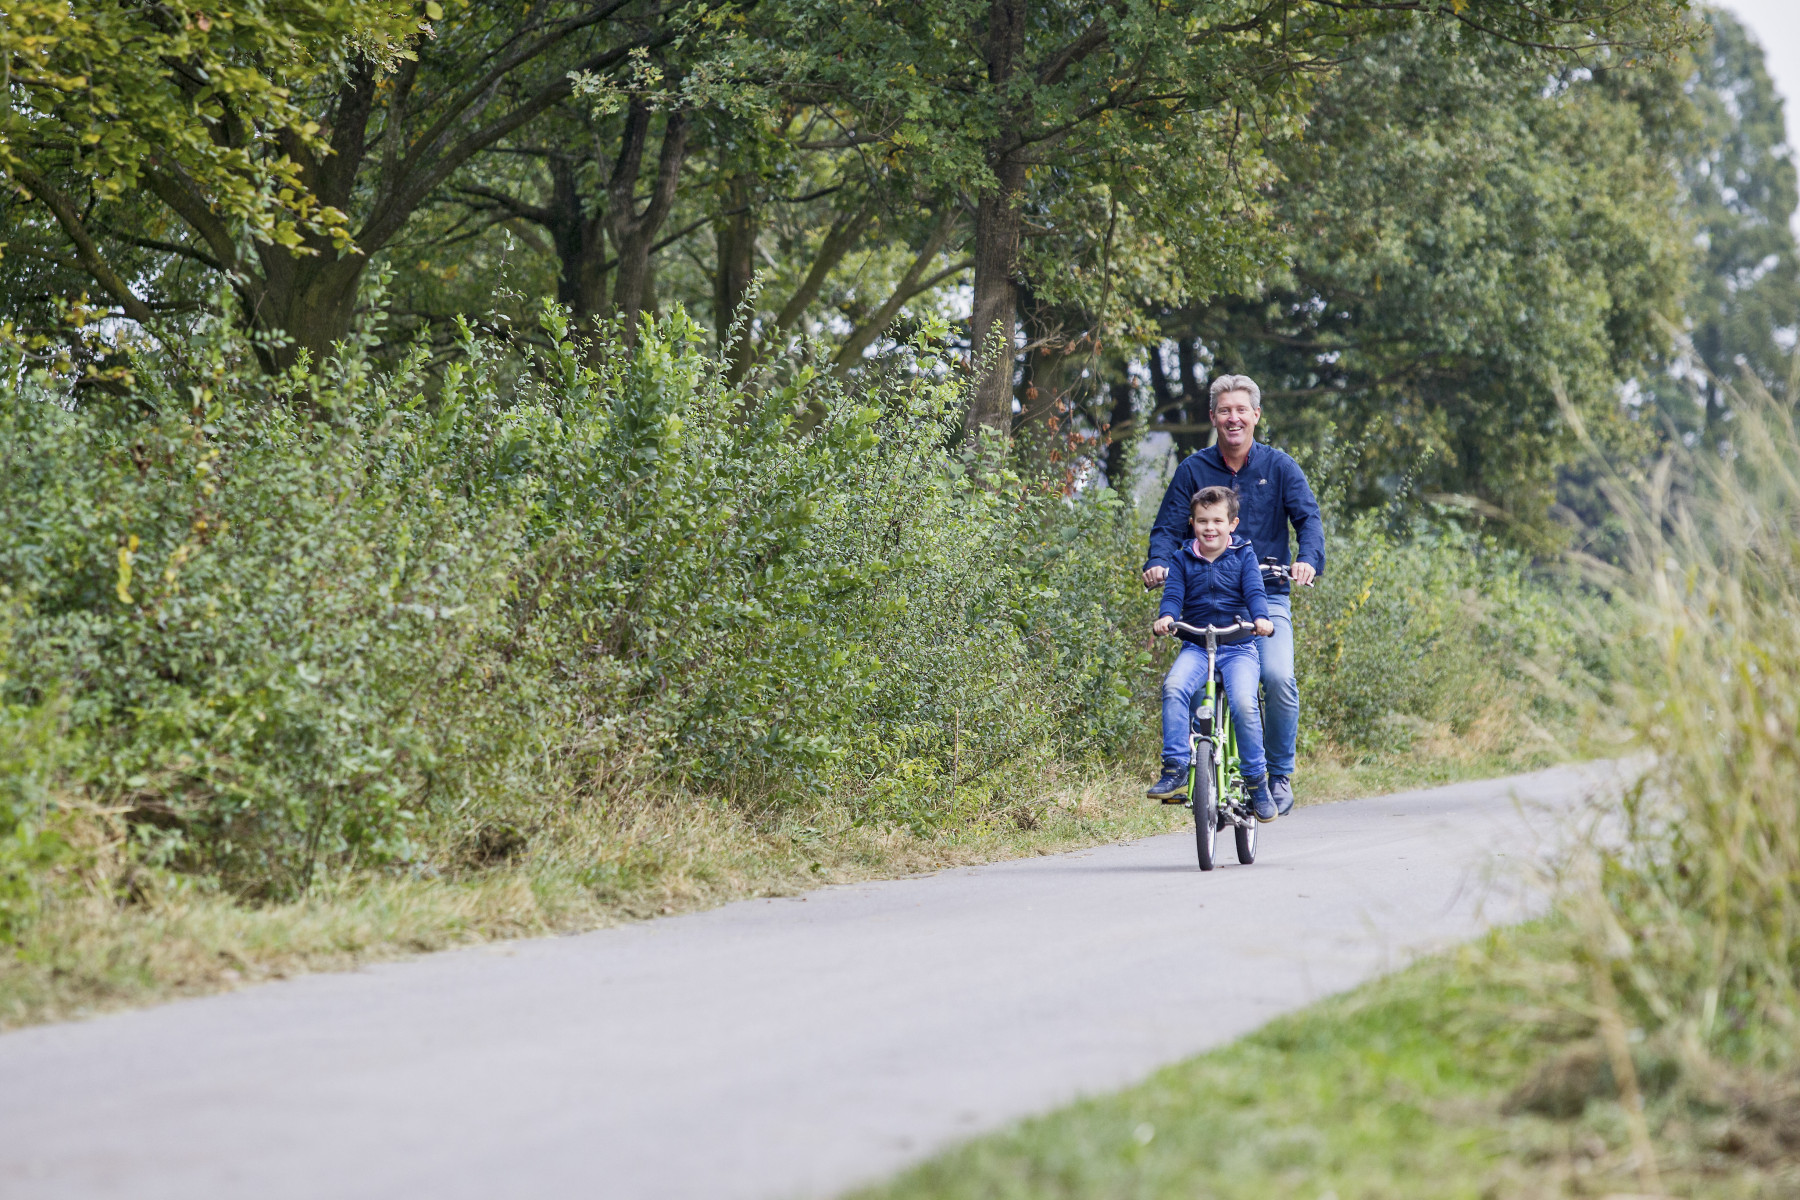 An adult and child riding a Kivo Tandem bike down a cycle path with hedges and trees on either side.